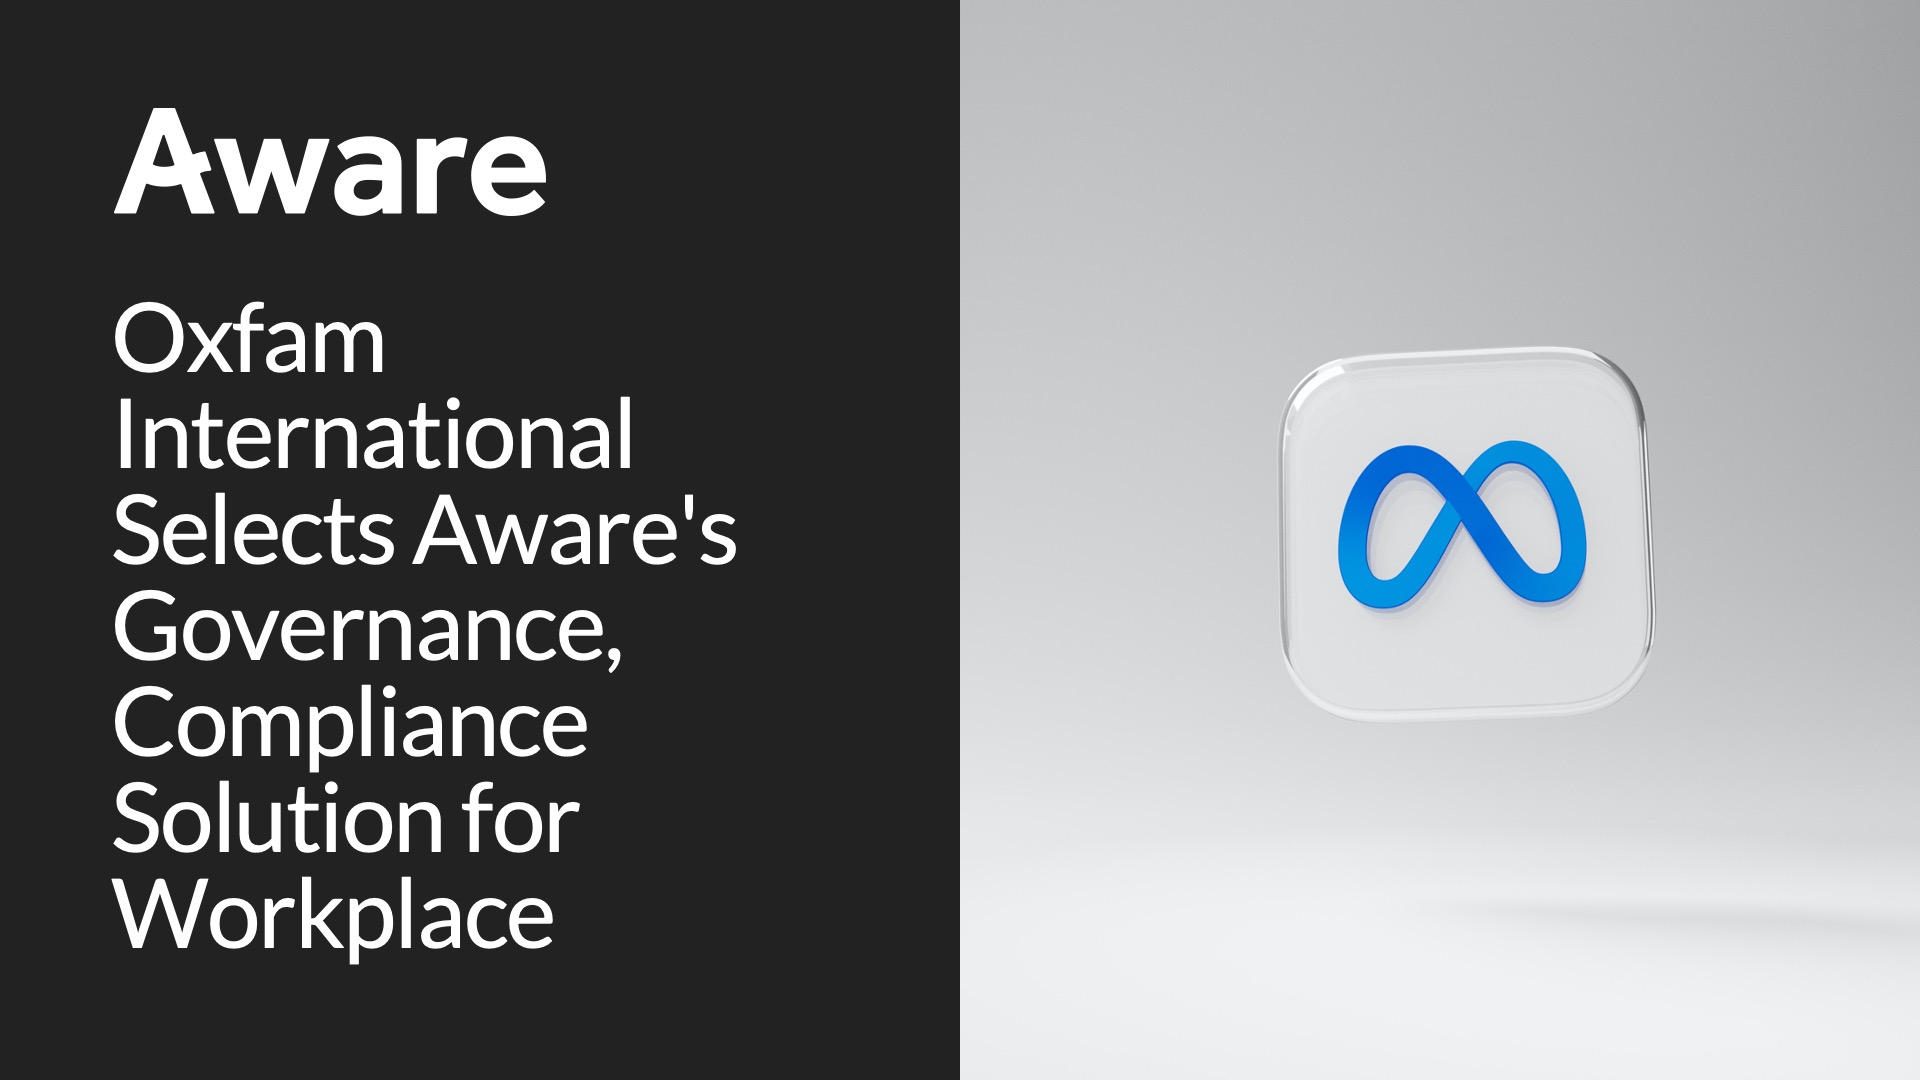 Oxfam International Selects Aware's Governance, Compliance Solution for Workplace By Facebook Collaboration Environment